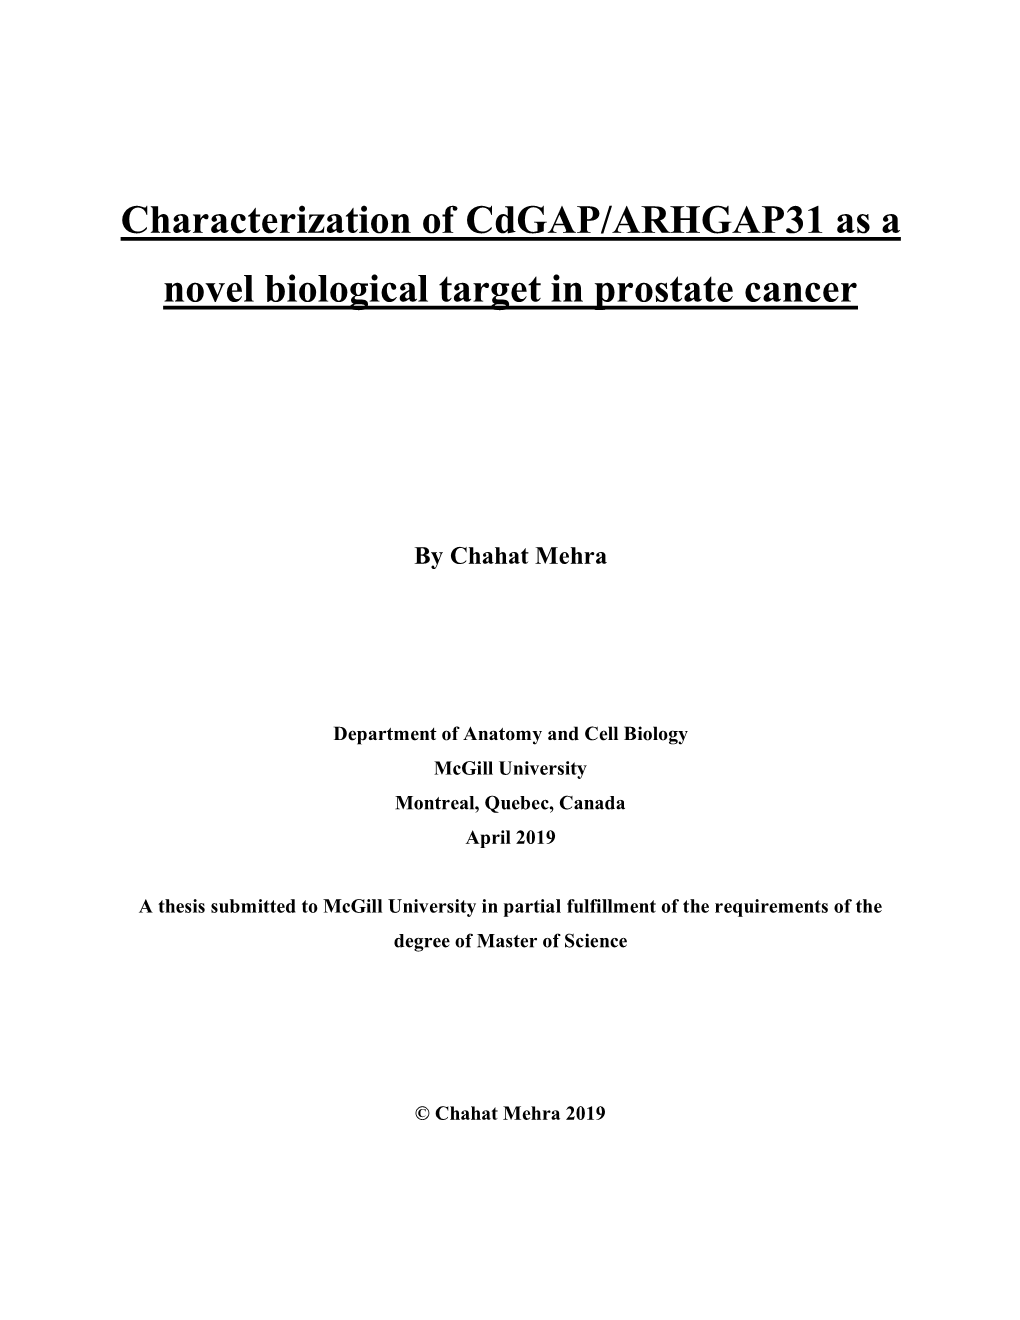 Characterization of Cdgap/ARHGAP31 As a Novel Biological Target in Prostate Cancer